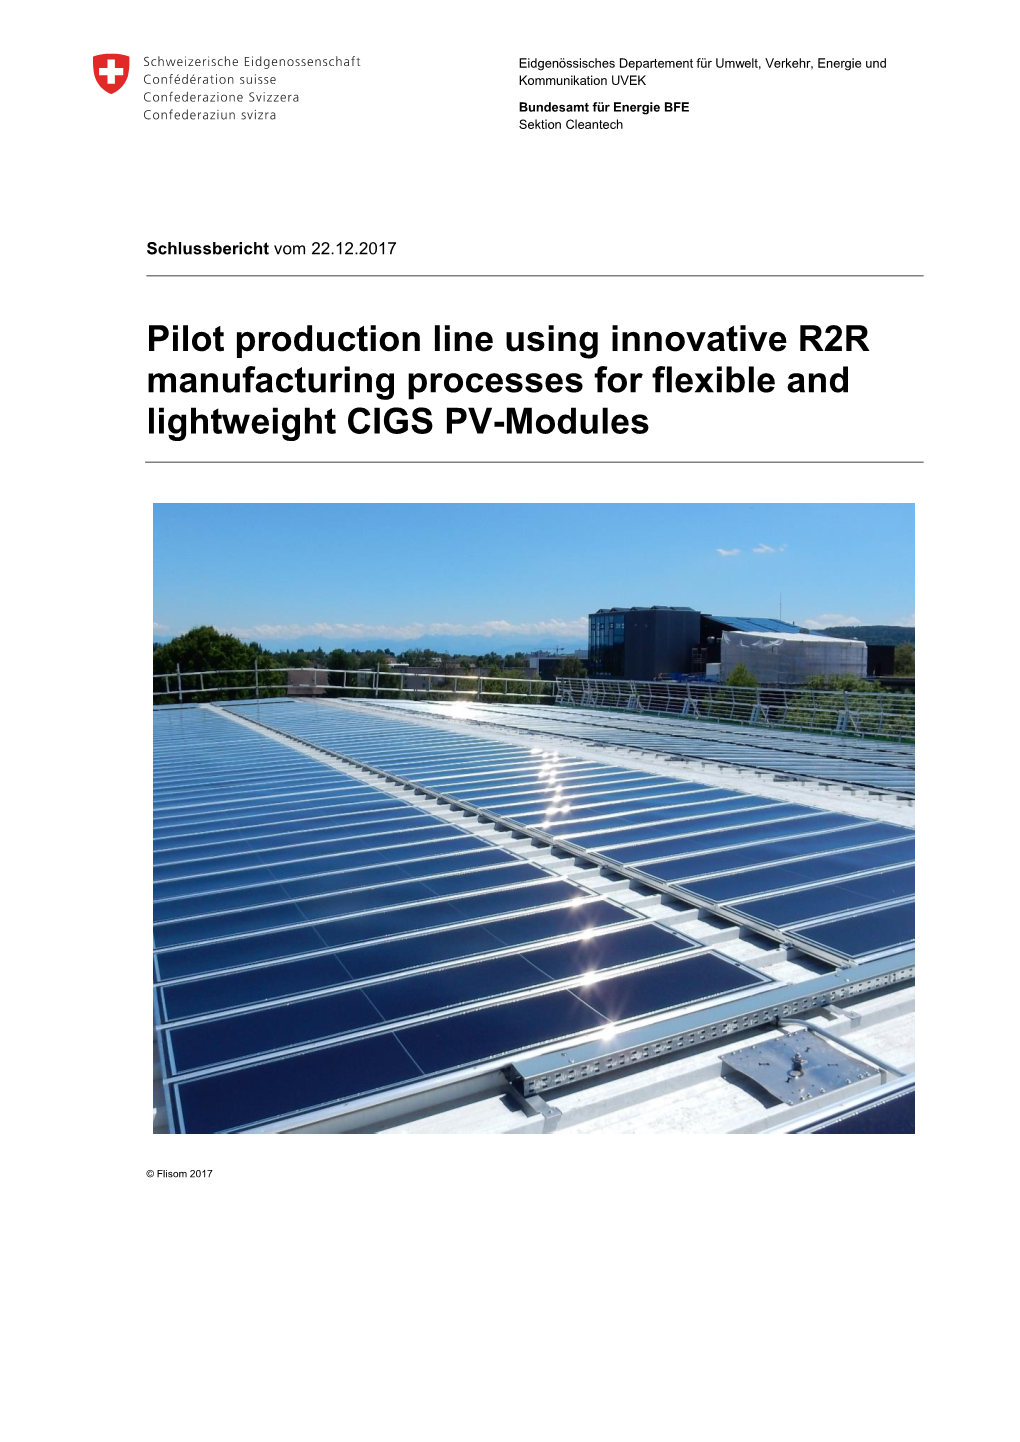 Pilot Production Line Using Innovative R2R Manufacturing Processes for Flexible and Lightweight CIGS PV-Modules